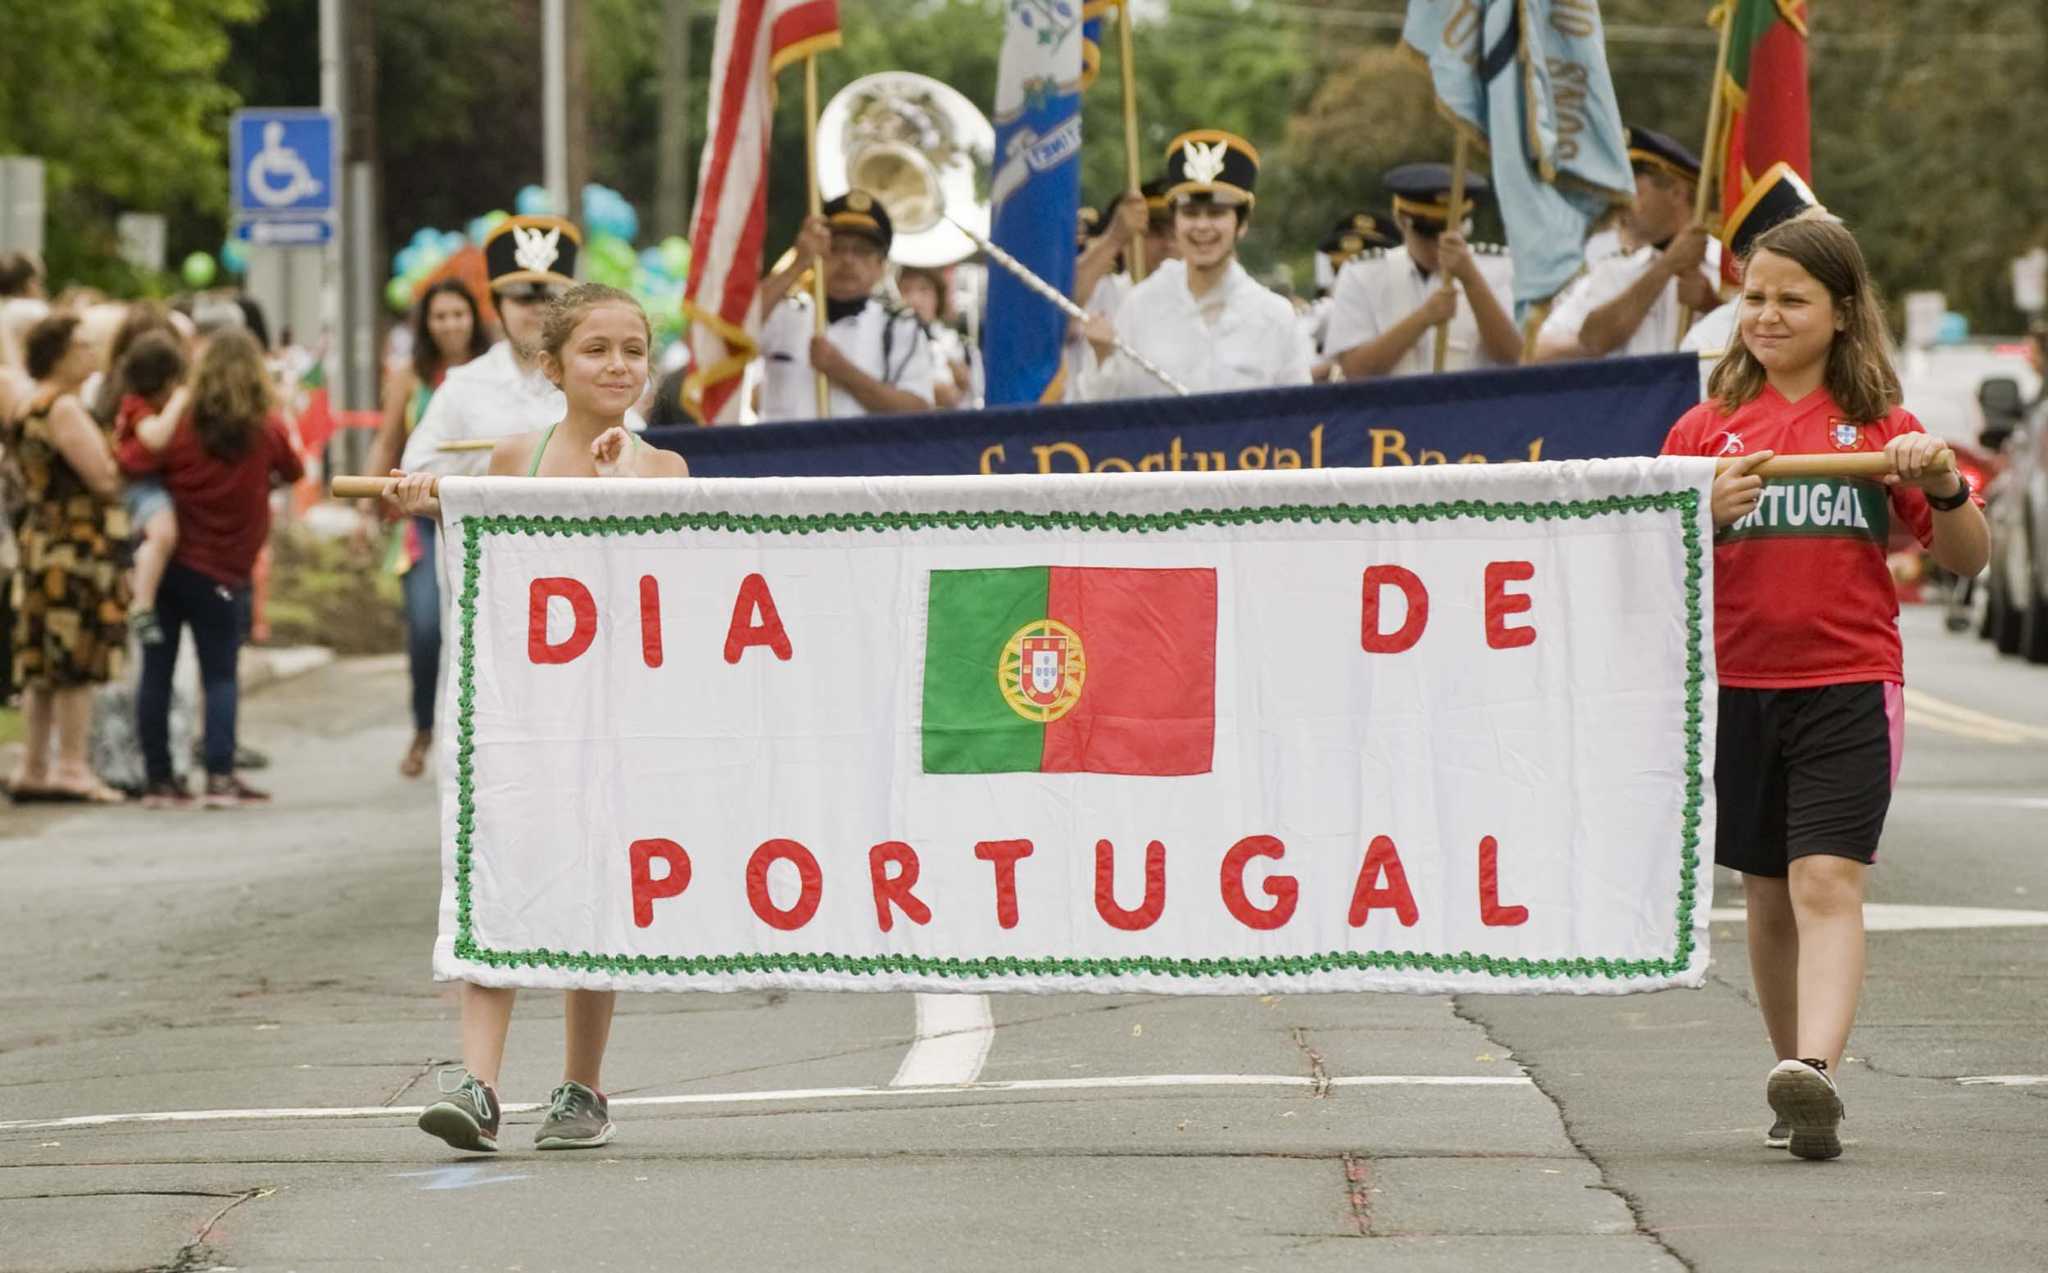 Portuguese Day returns to Danbury with parade, cultural activities ‘Be